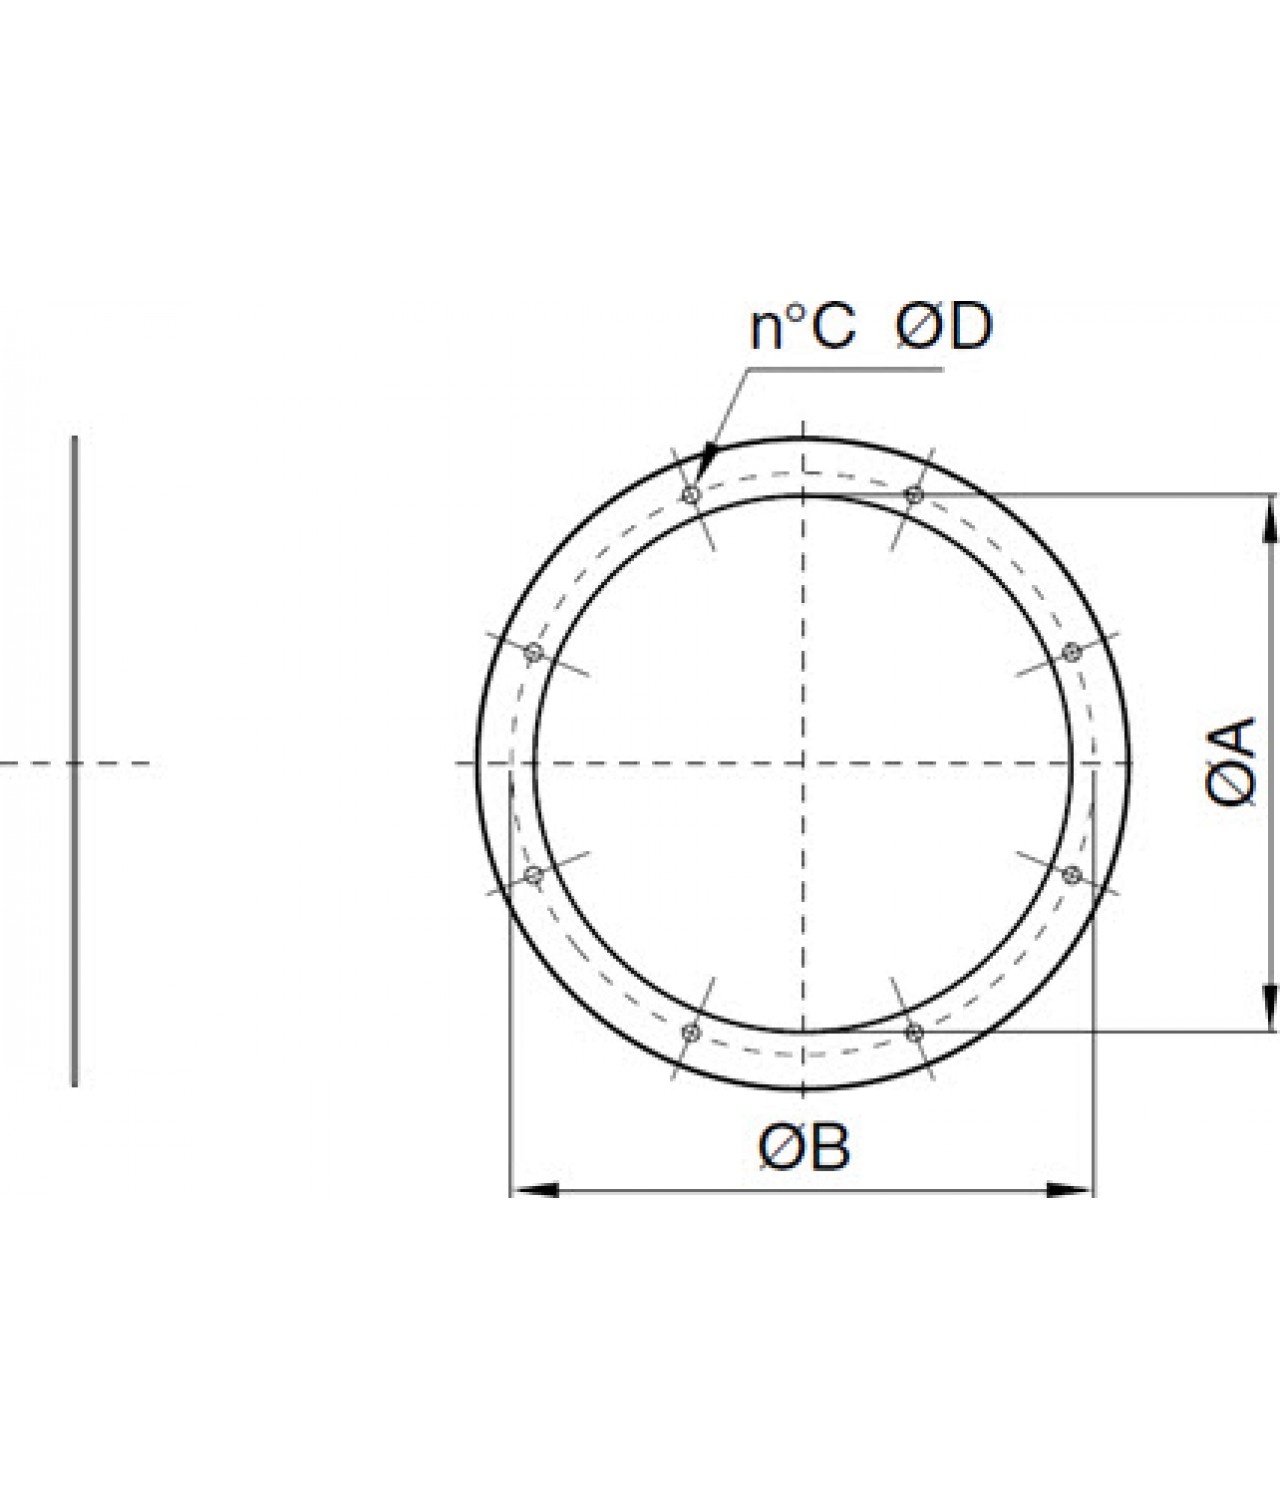 CCf - connecting ring, ordered separately